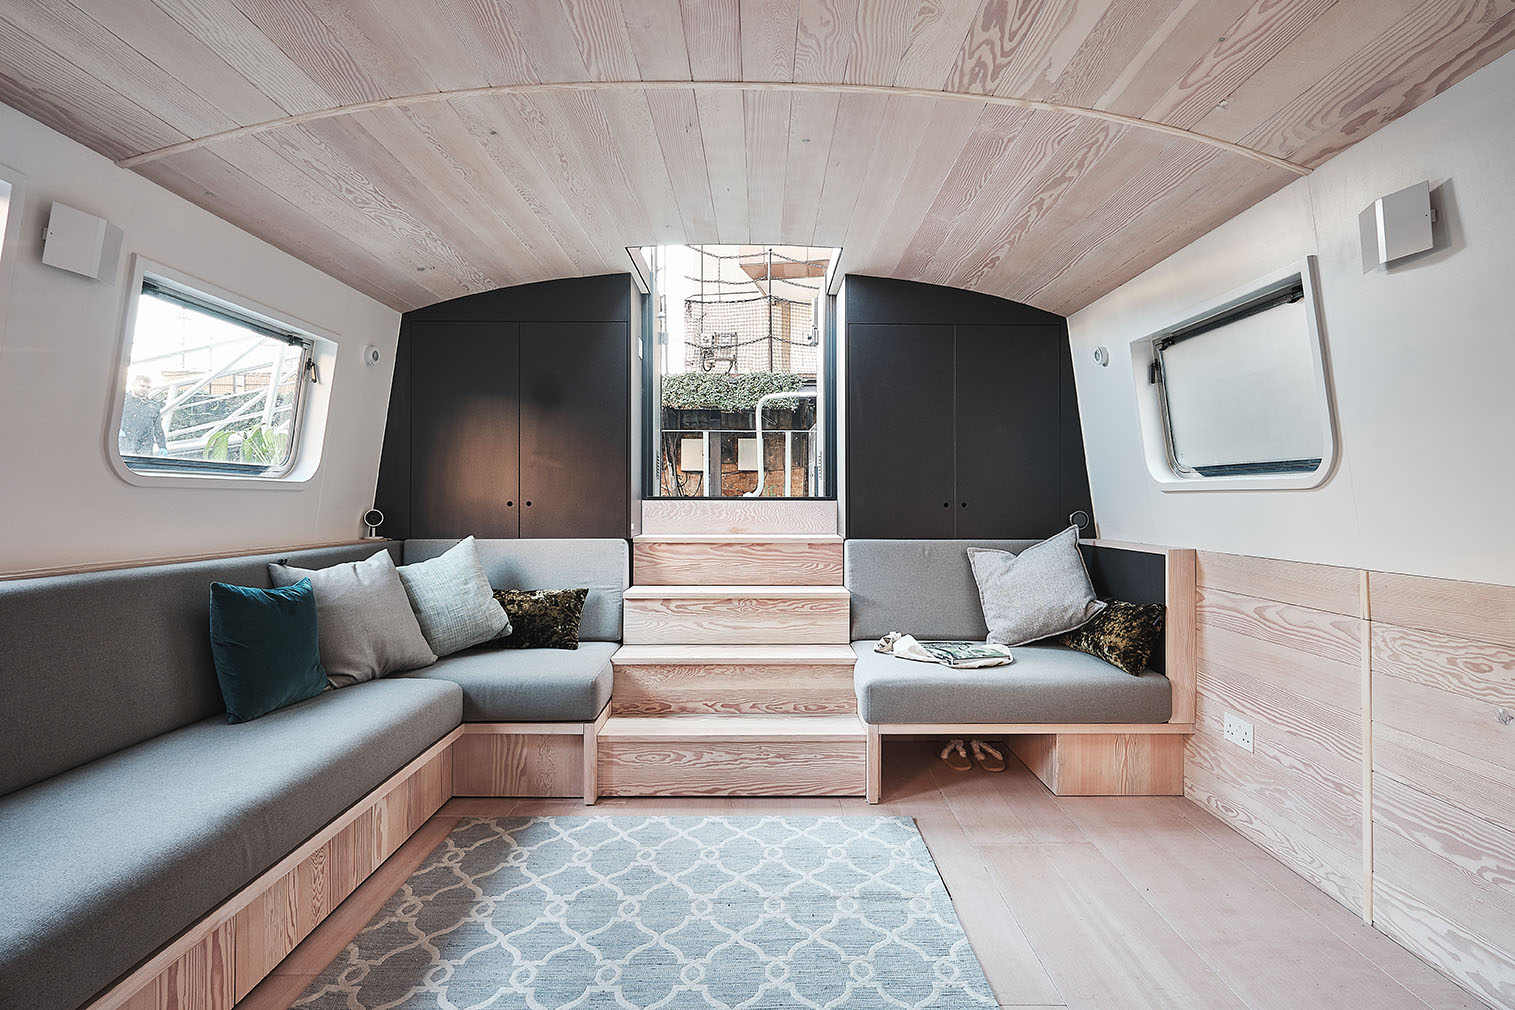 The Dusky Parakeet house boat designed by 31/44 Architects. It's for sale via Aucoot